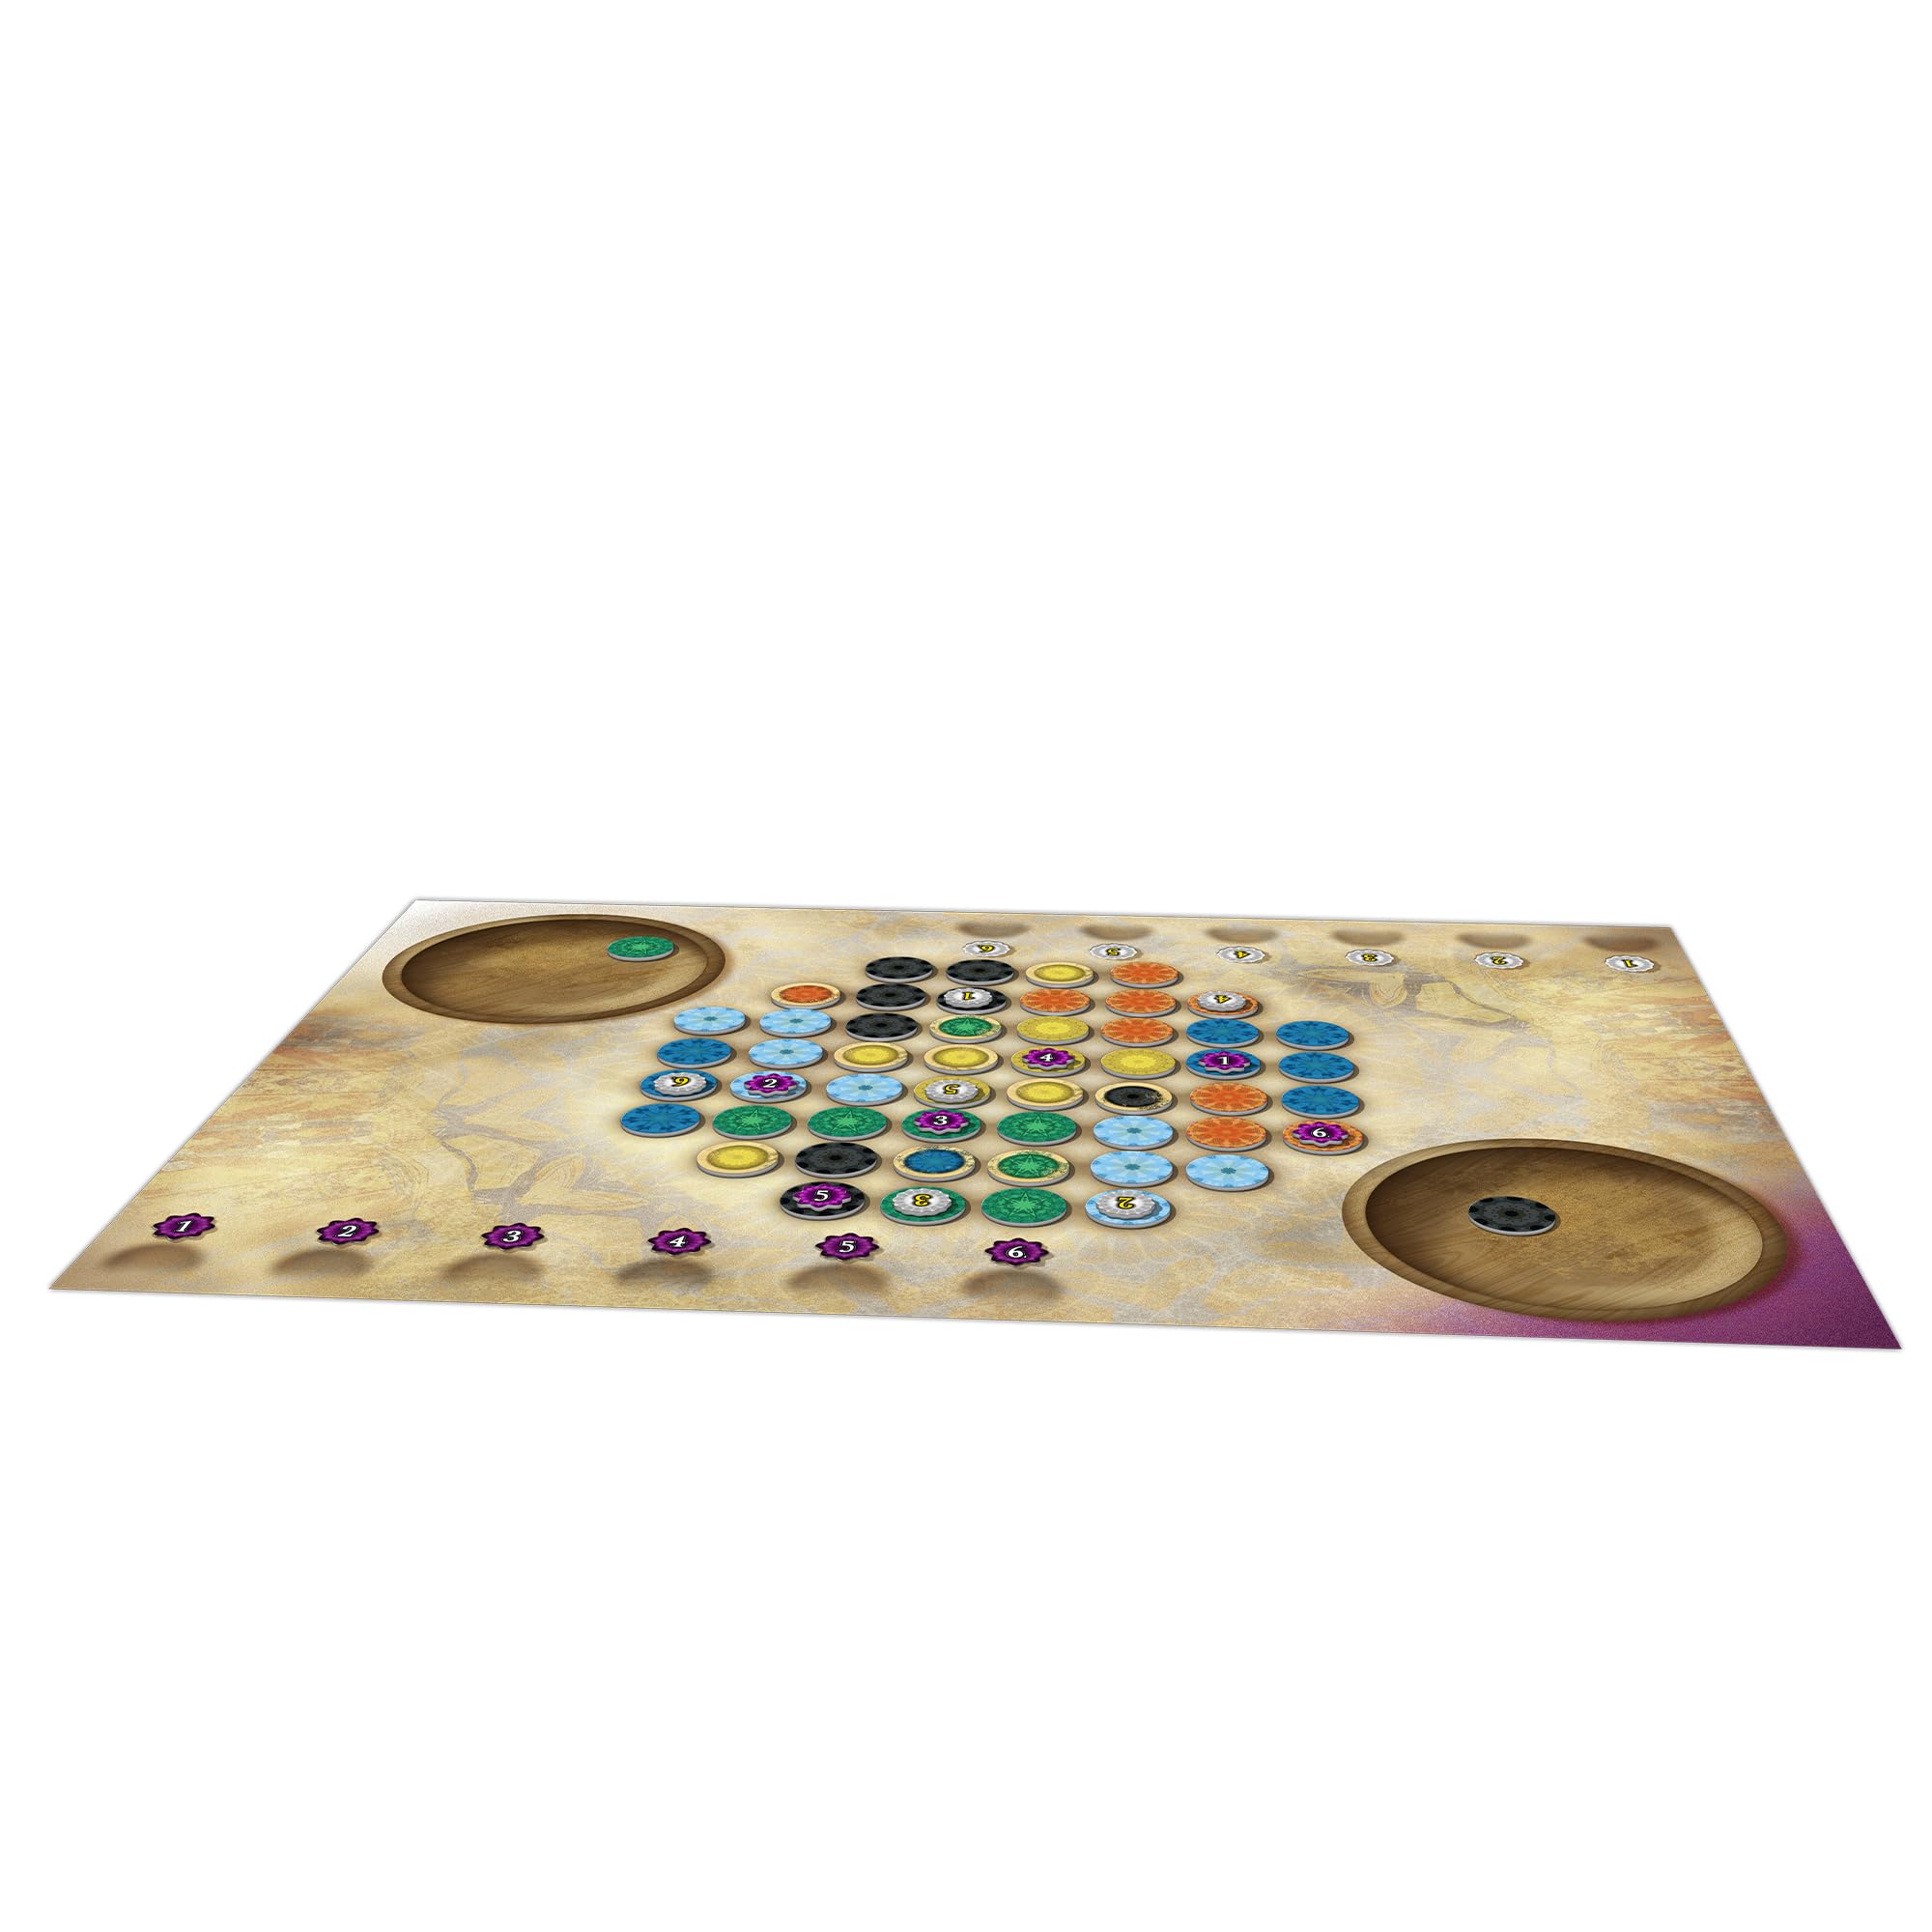 Patterns: A Mandala Game - Engaging Strategy Board Game with Unique Tea Towel Play Mat, Fun Family Game for Kids and Adults, Ages 10+, 2 Players, 15 Minute Playtime, Made by Lookout Games